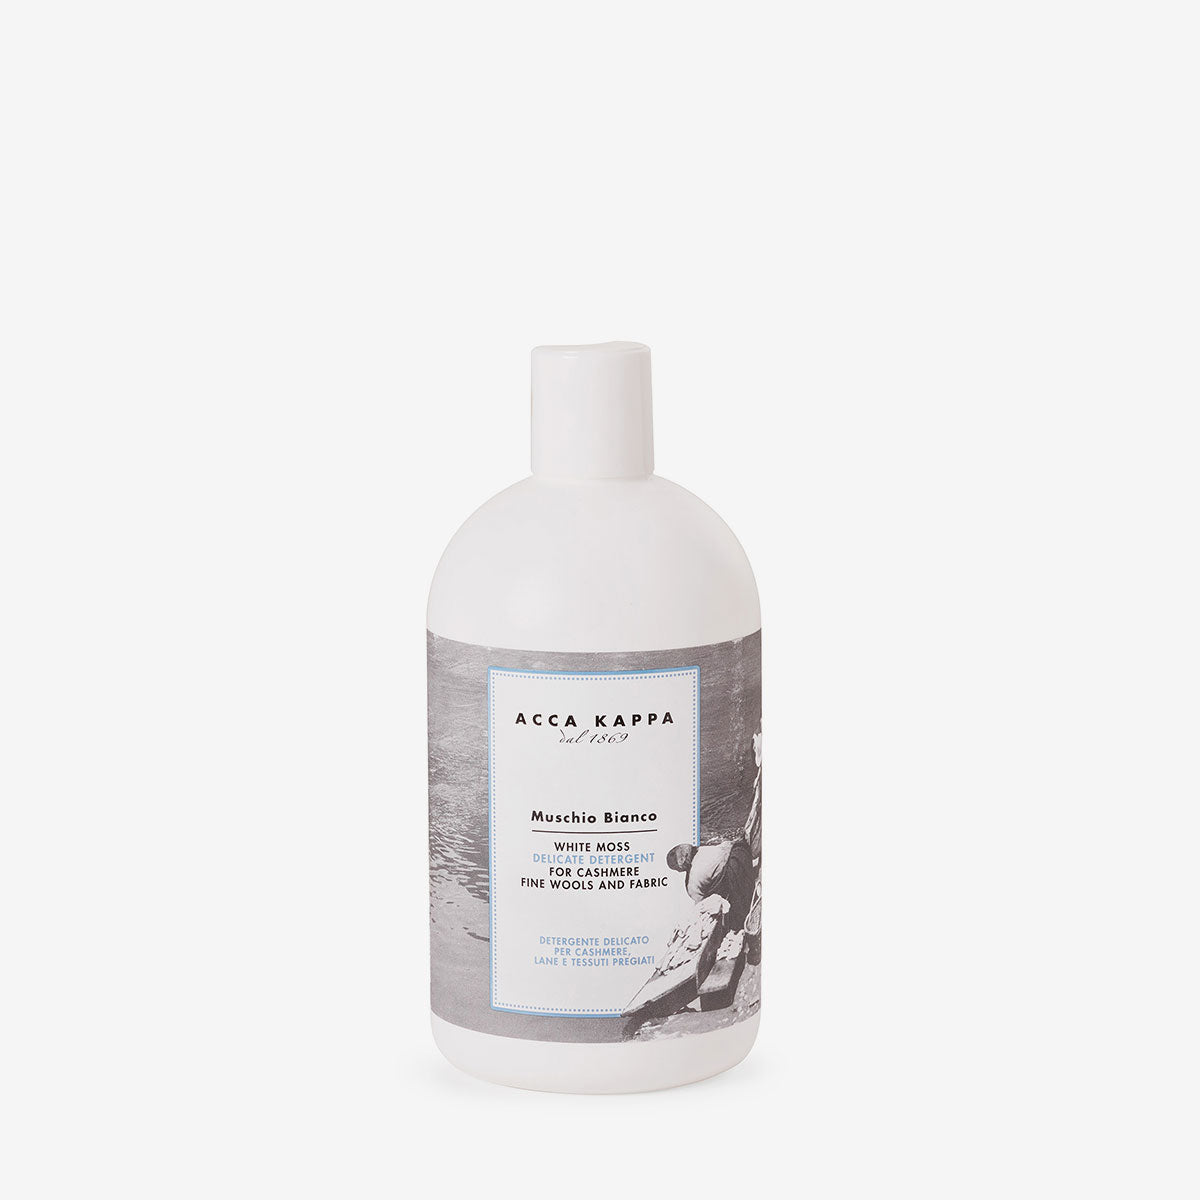 ACCA KAPPA White Moss Delicate Fabric Detergent 500ml